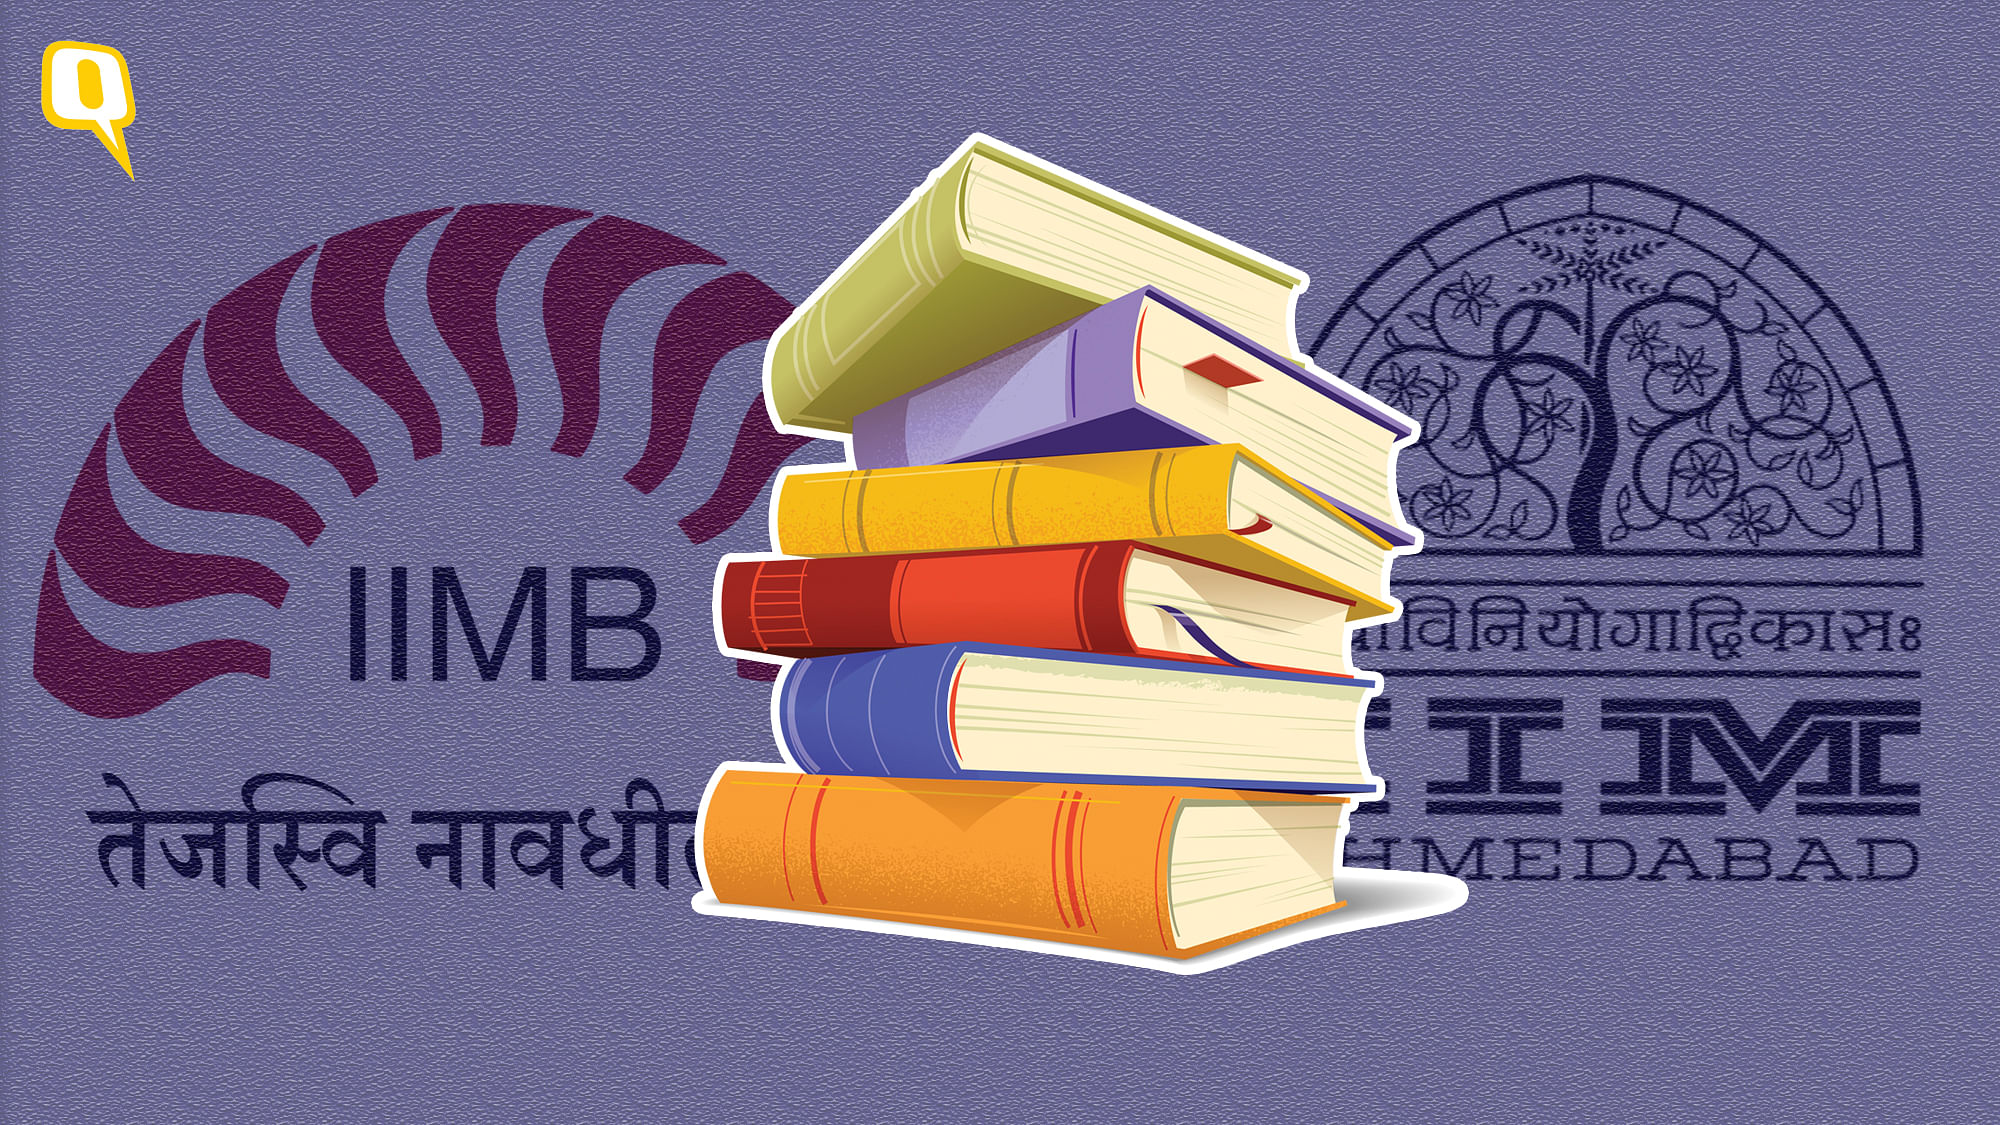 

Global IIM Alumni Network raises concerns about the under-representation of reserved category at premier B-schools.